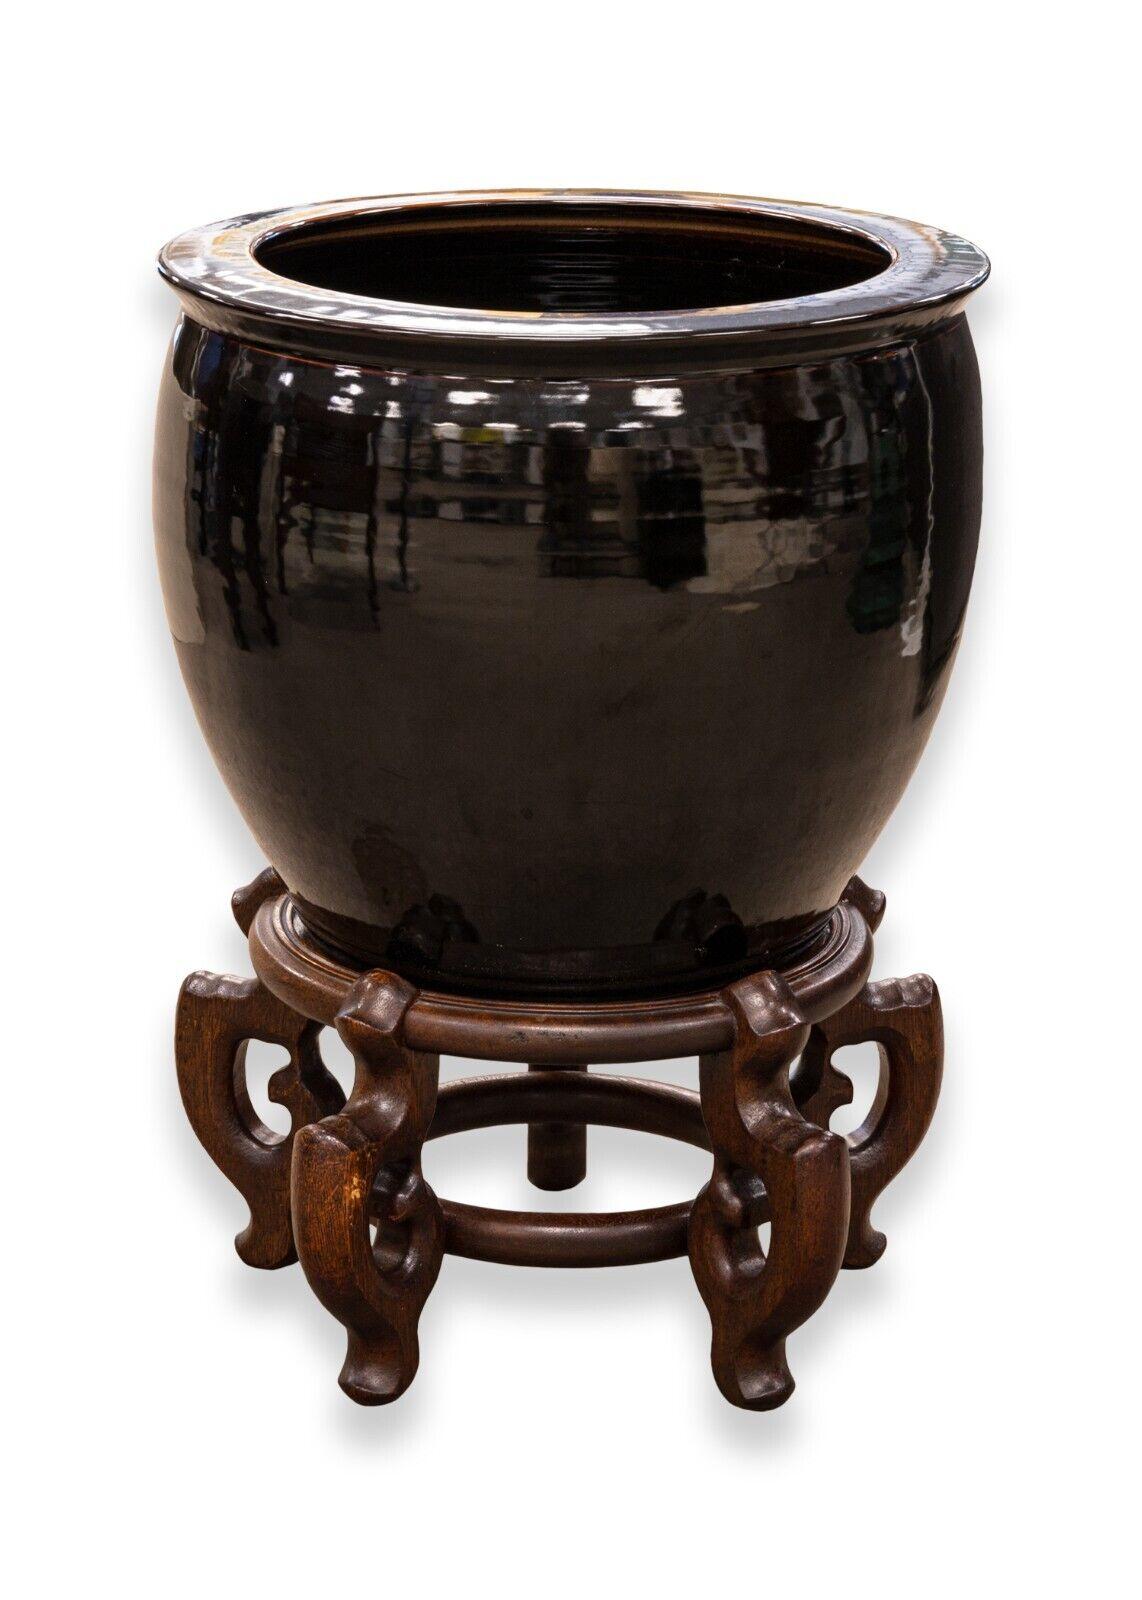 A timeless pair of Asian urn floor ceramic vases on ornate wooden stands. These vases have a rich black colored glaze with hints of color around the rim. They sit on a pair of stunning ornate wooden stands. These floor vases would look even more